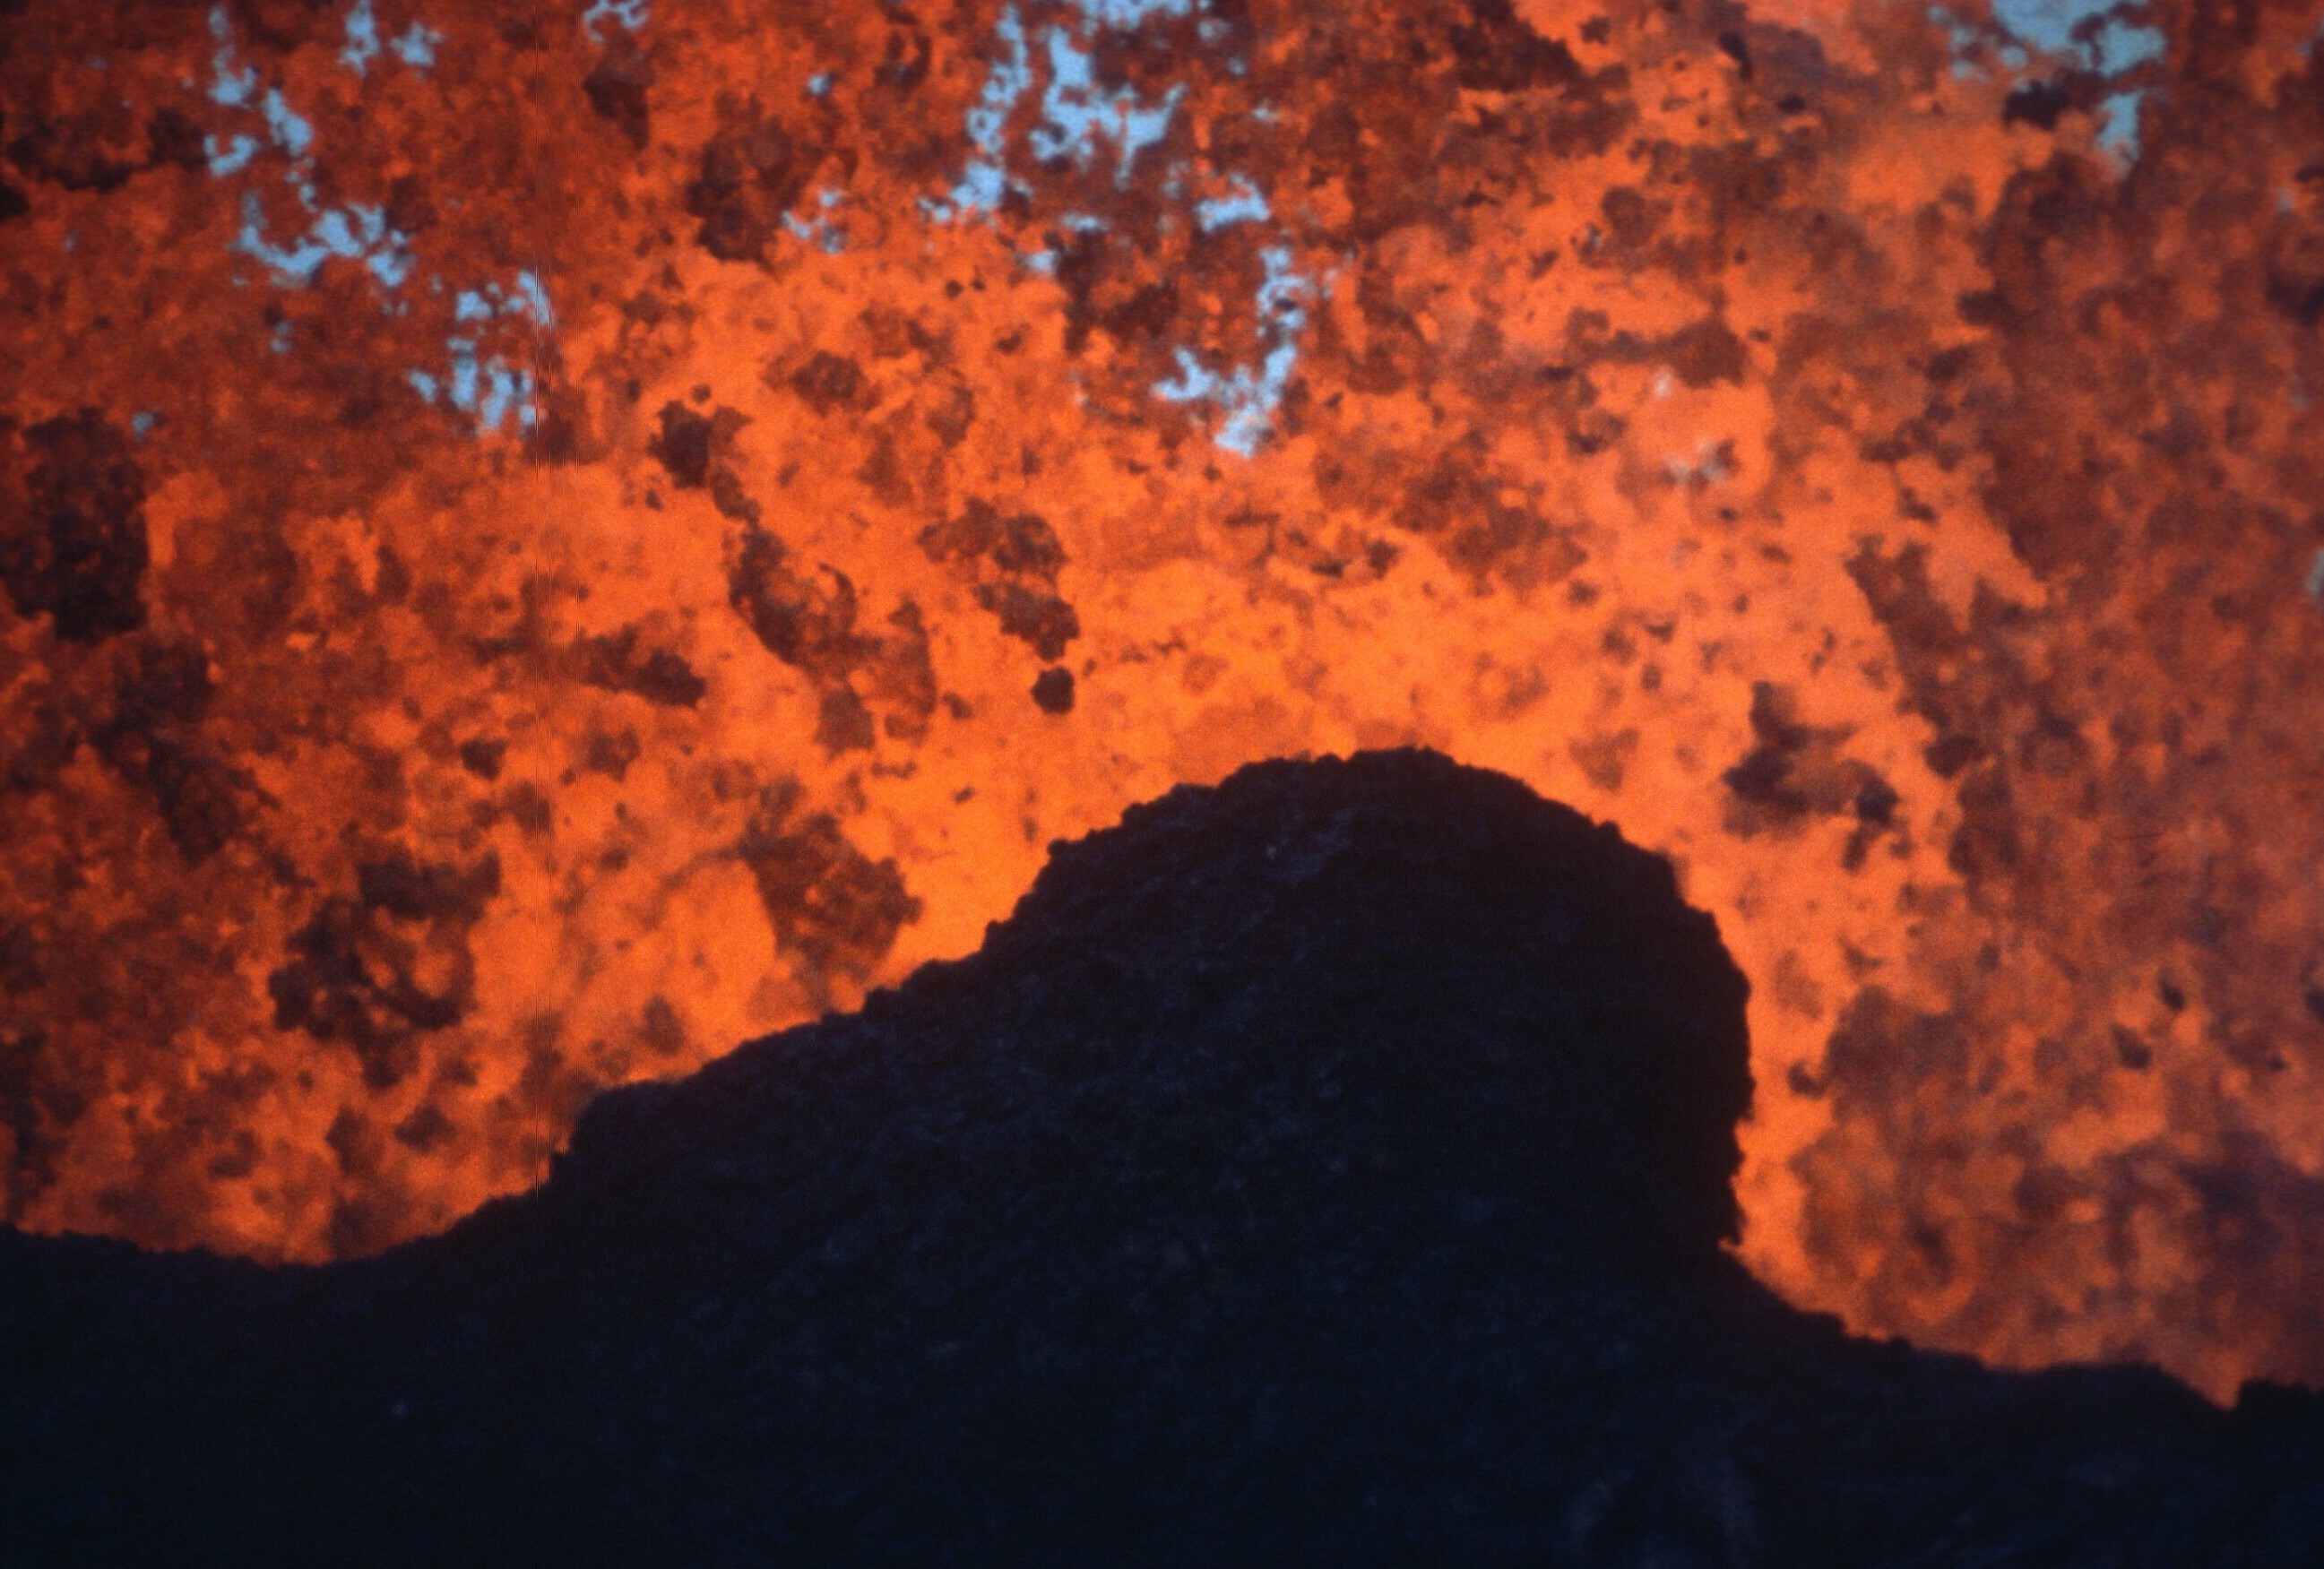 Erupting orange molten lava with a silhouetted rock in the foreground